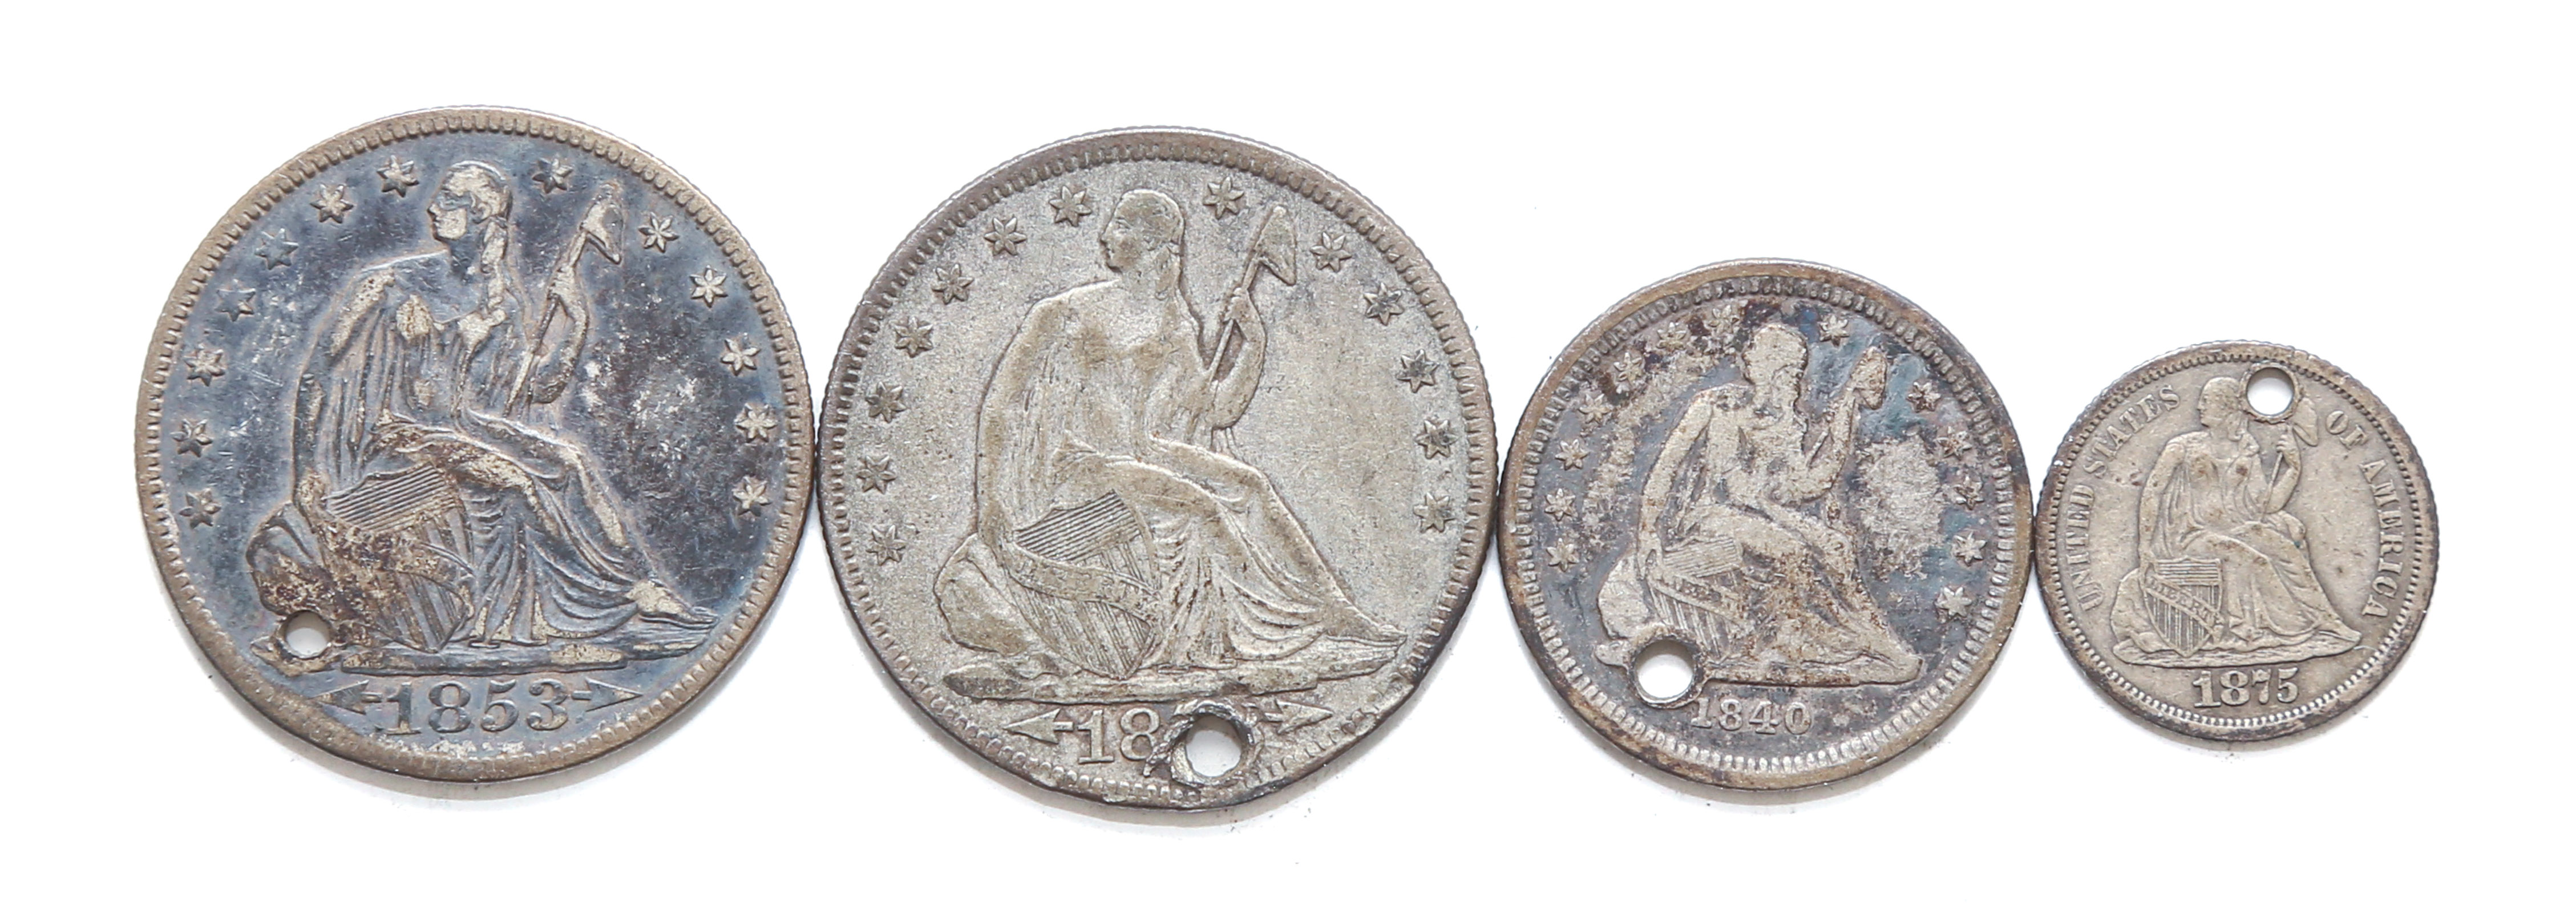 FOUR SEATED LIBERTY COINS NICE,